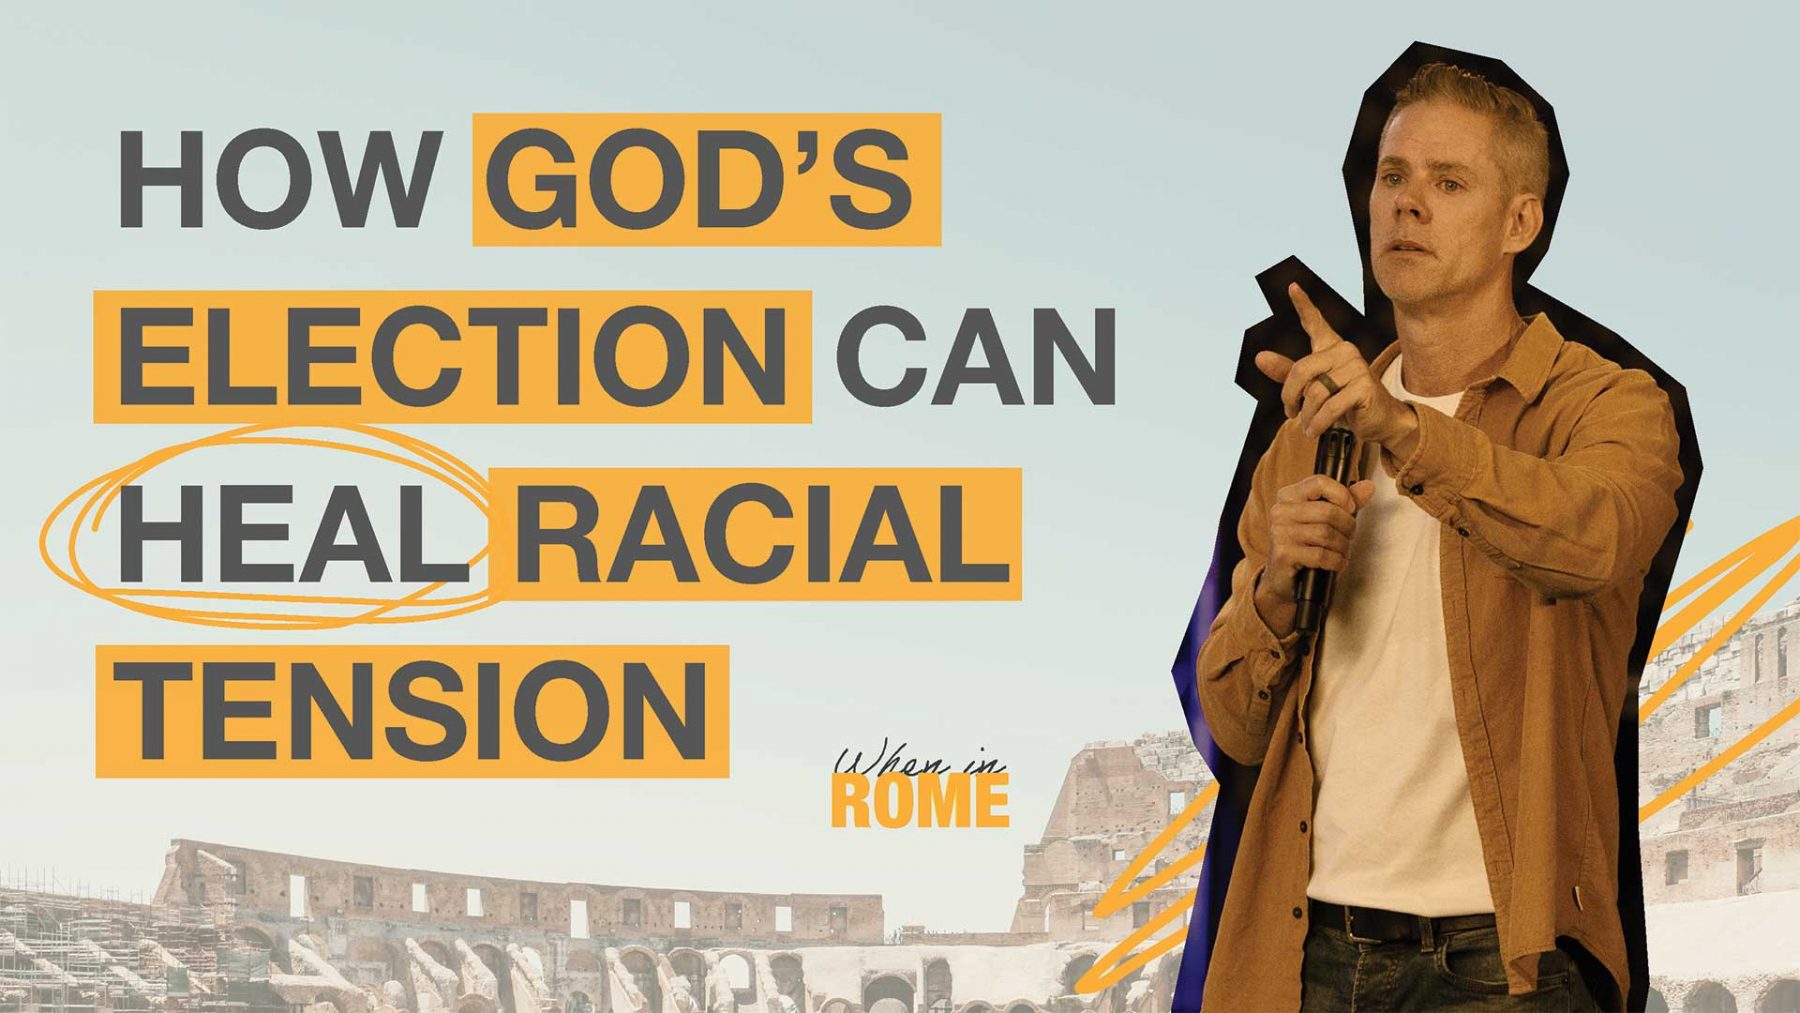 How God’s Election Can Heal Racial Tension